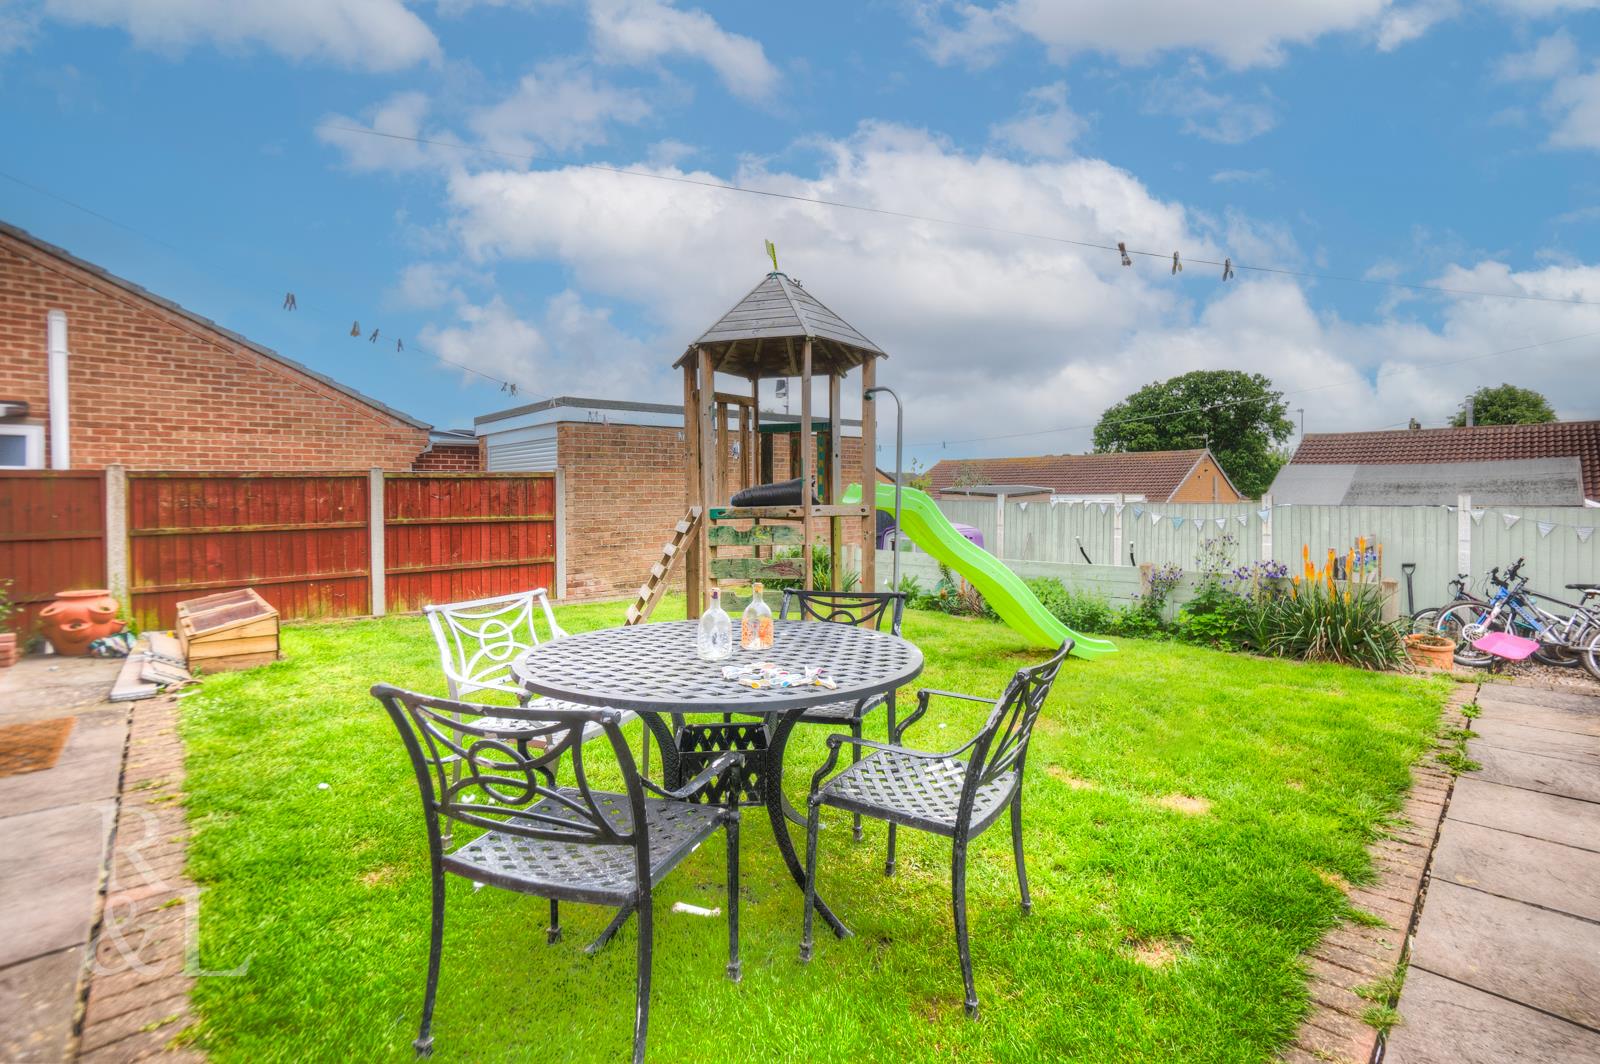 Property image for Crich Way, Newhall